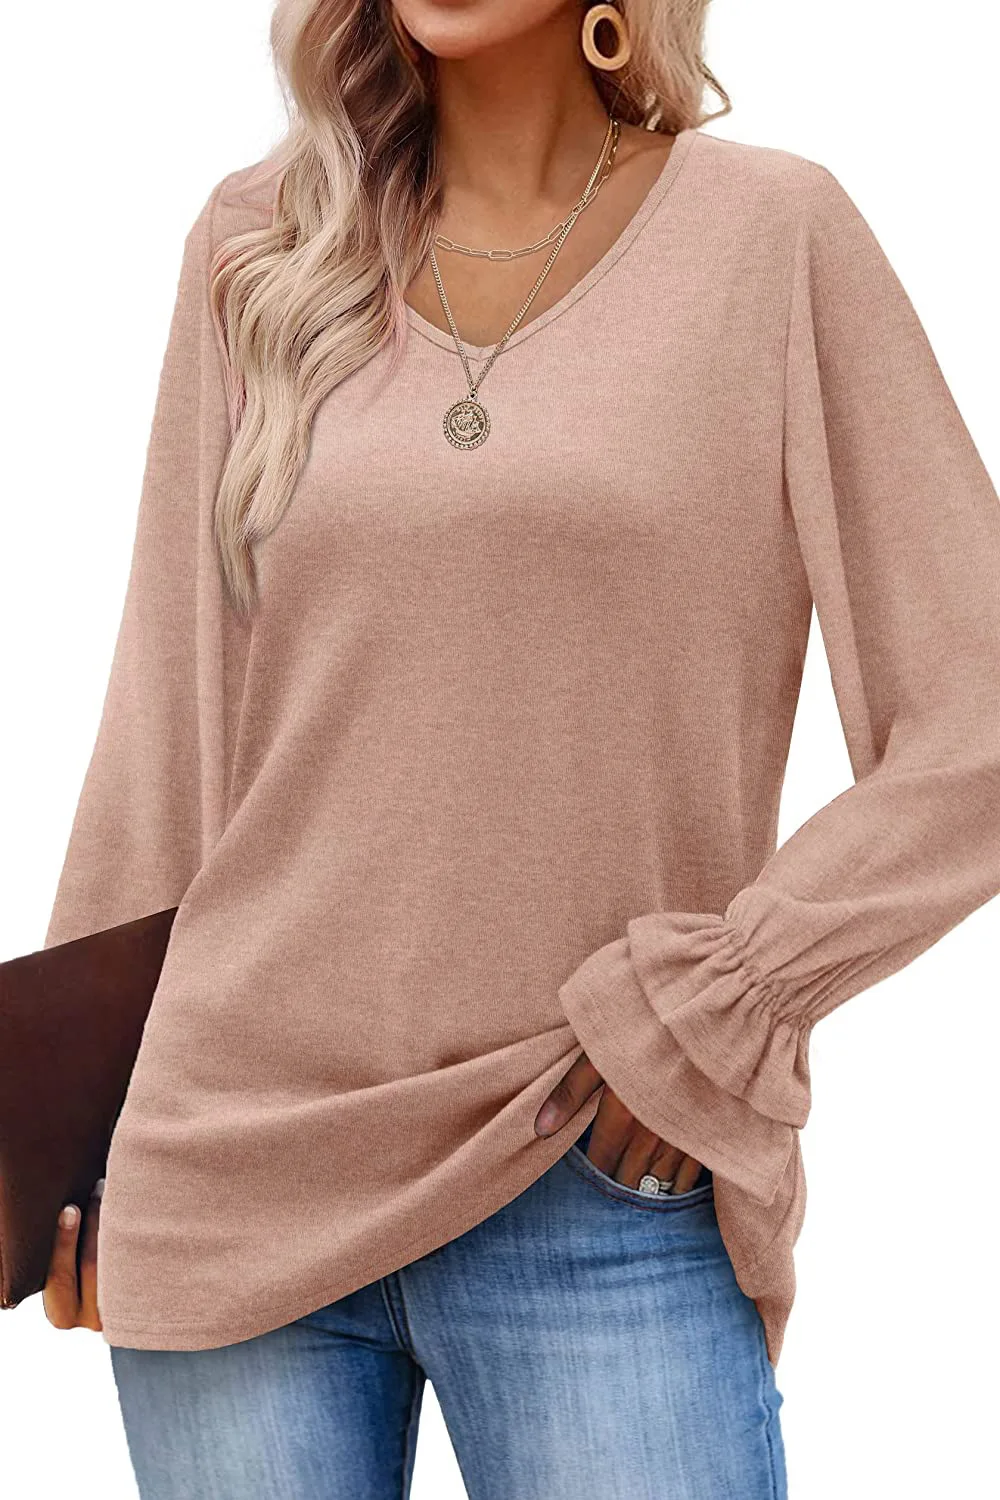 2022 Autumn and Winter New Bell-sleeved Long-sleeved Round Neck Solid Color T-shirt Top Women's Clothing Shirts for Women